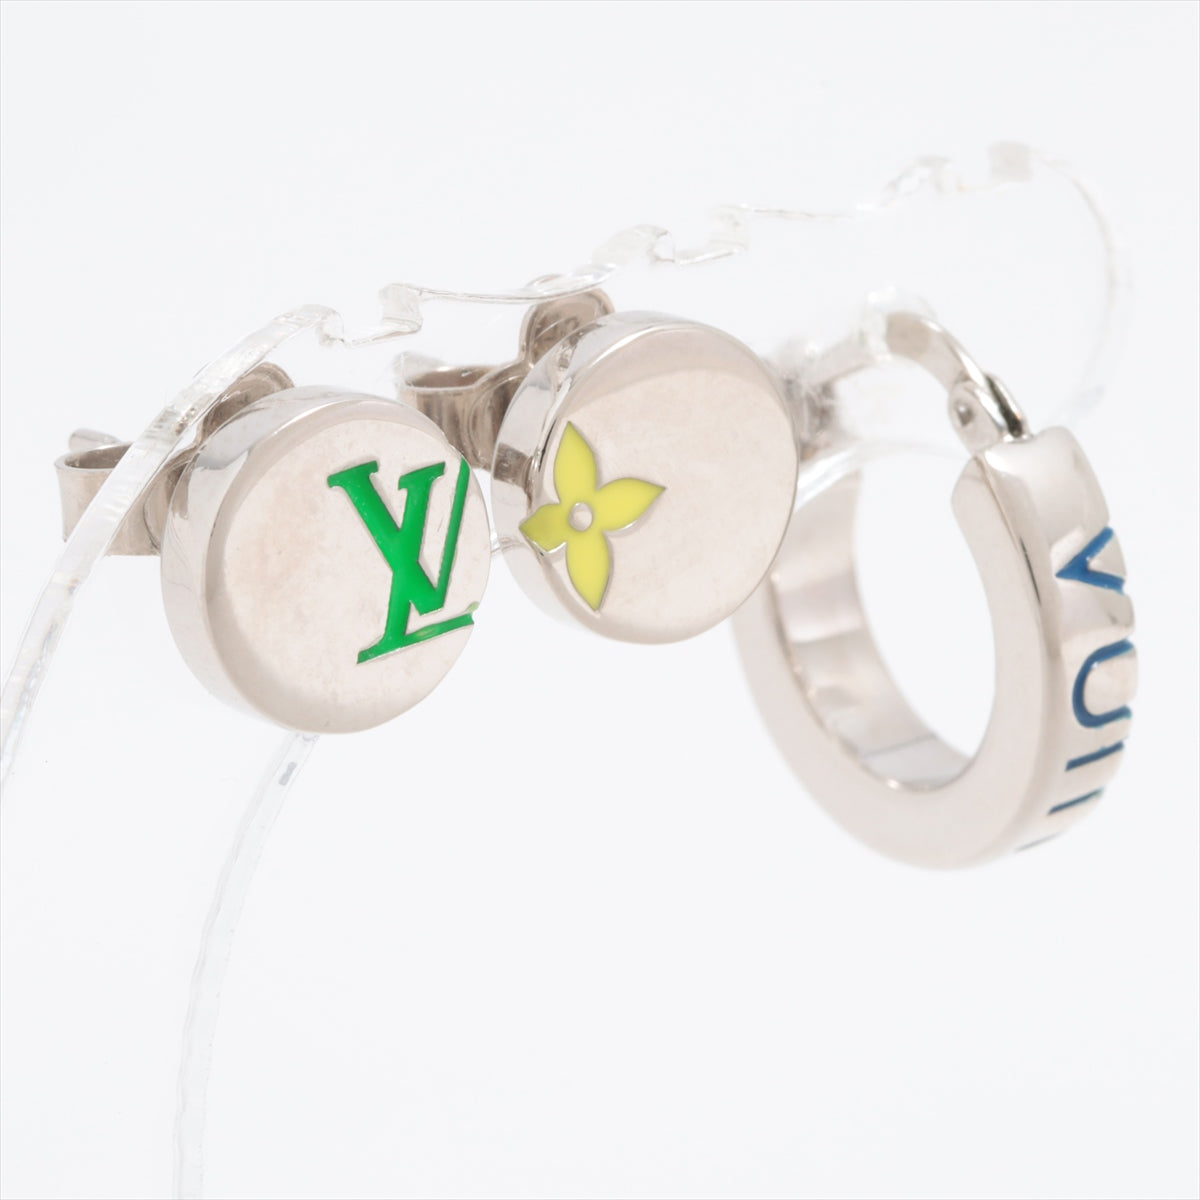 Louis Vuitton RM0273 Piercing jewelry (for both ears) metal Silver M01186 Piercing jewelry Monogram Play Set 3